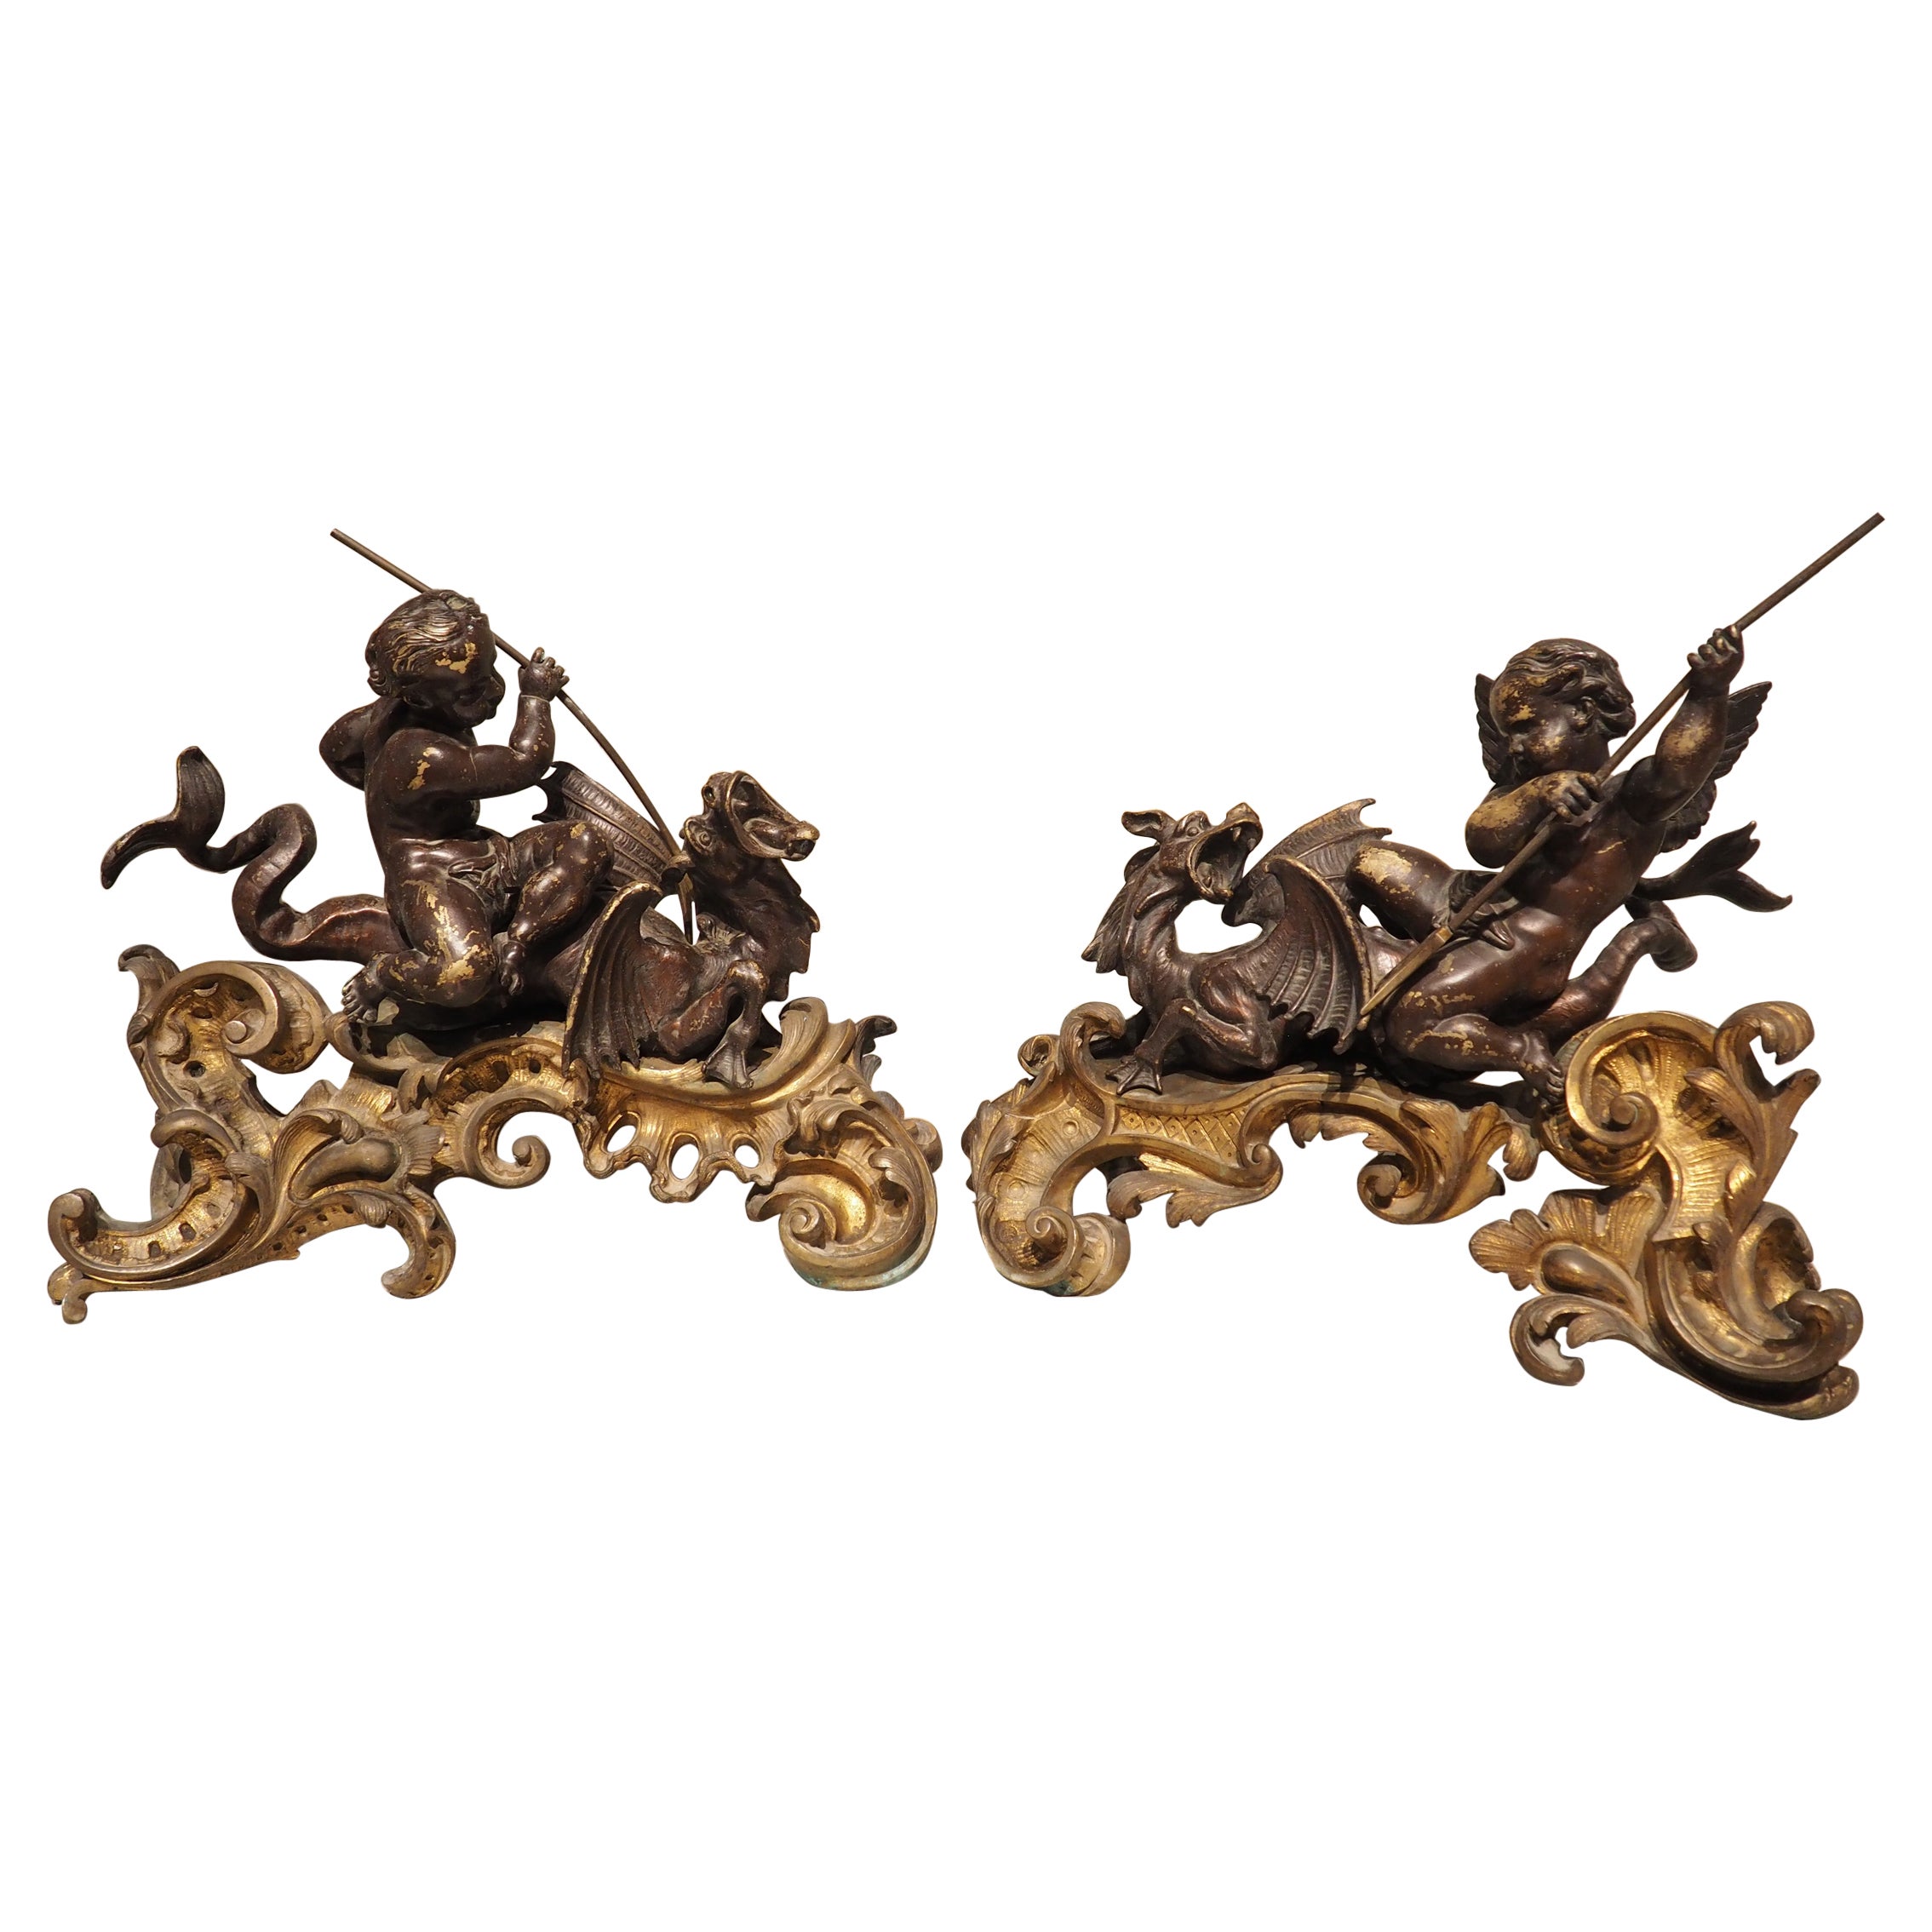 Impressive Pair of circa 1850 French Bronze Chenets with Putti and Dragons